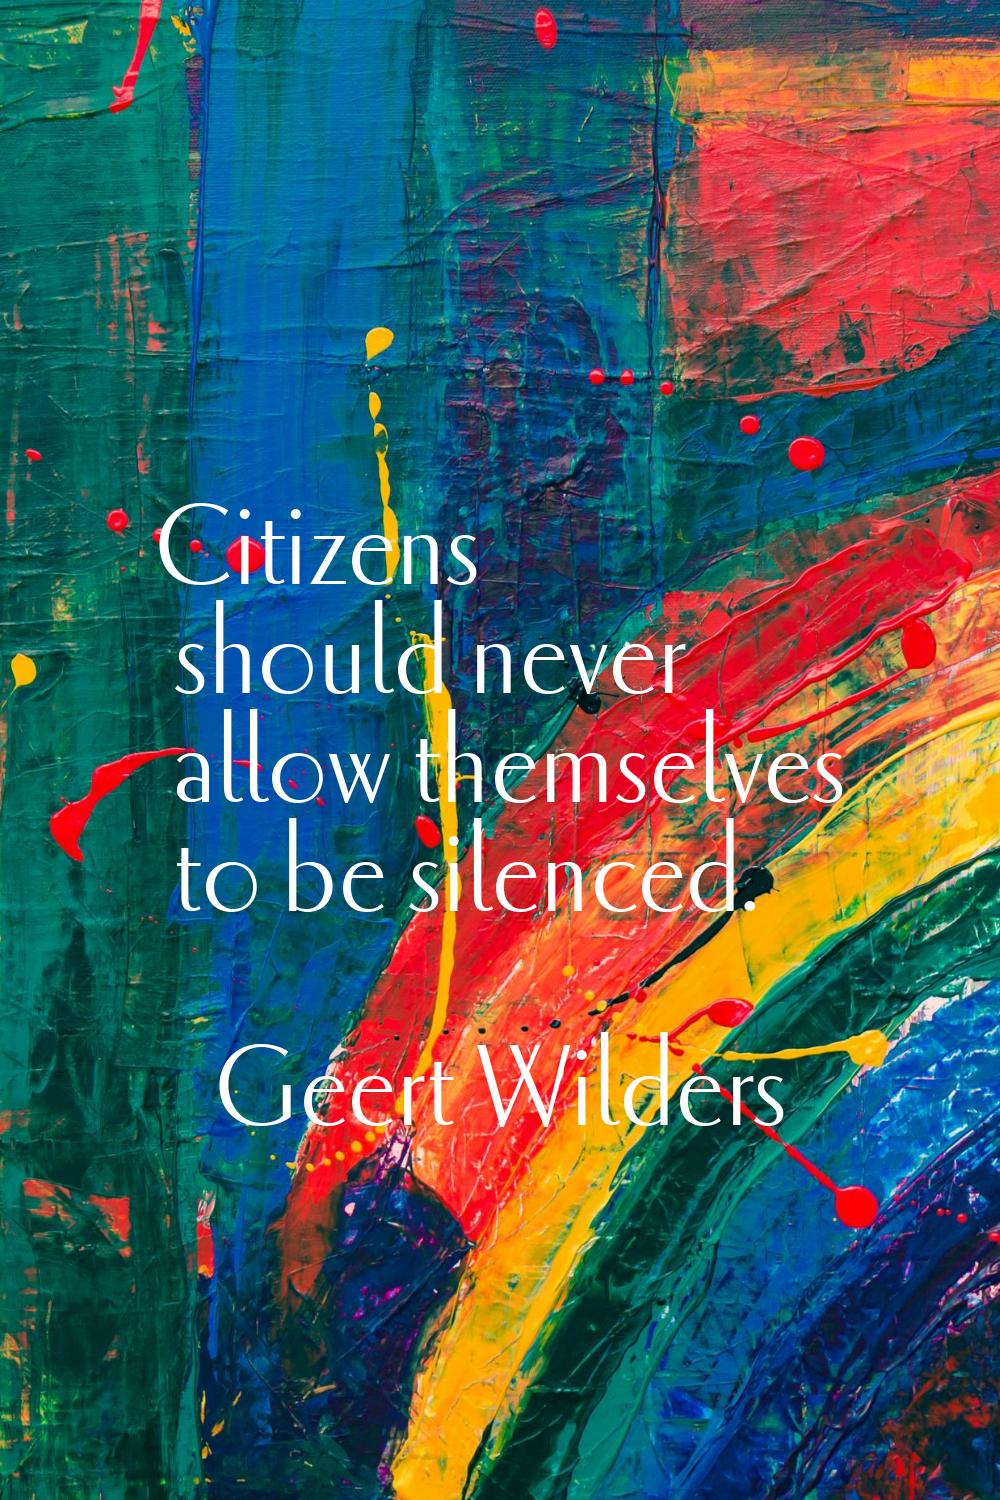 Citizens should never allow themselves to be silenced.